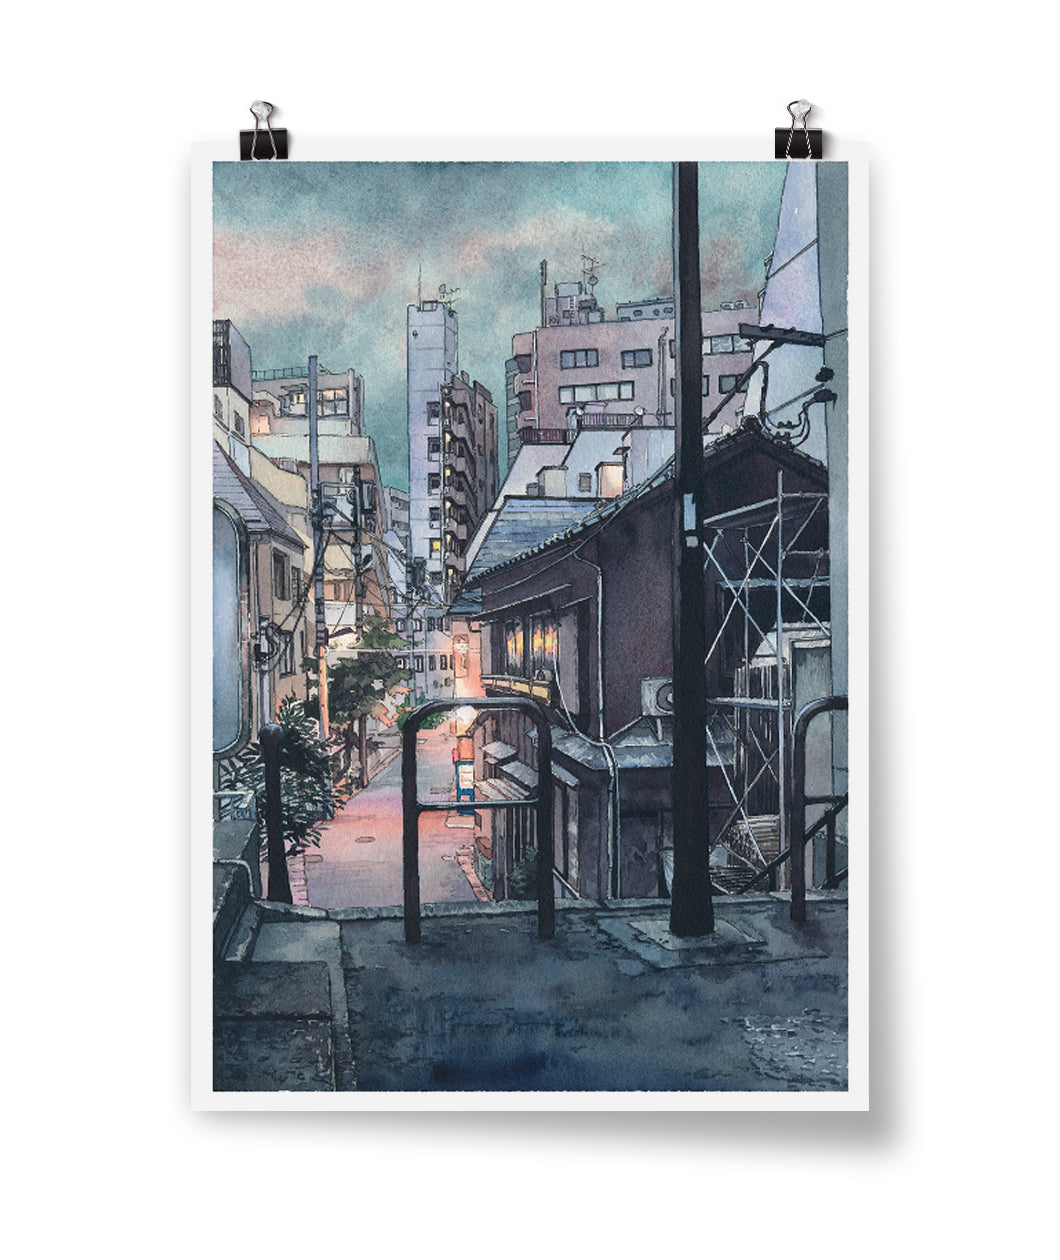 Poster of a water color by Mateusz Urbanowicz. Painted in cool colors, looking down a city street with buildings lit up. 